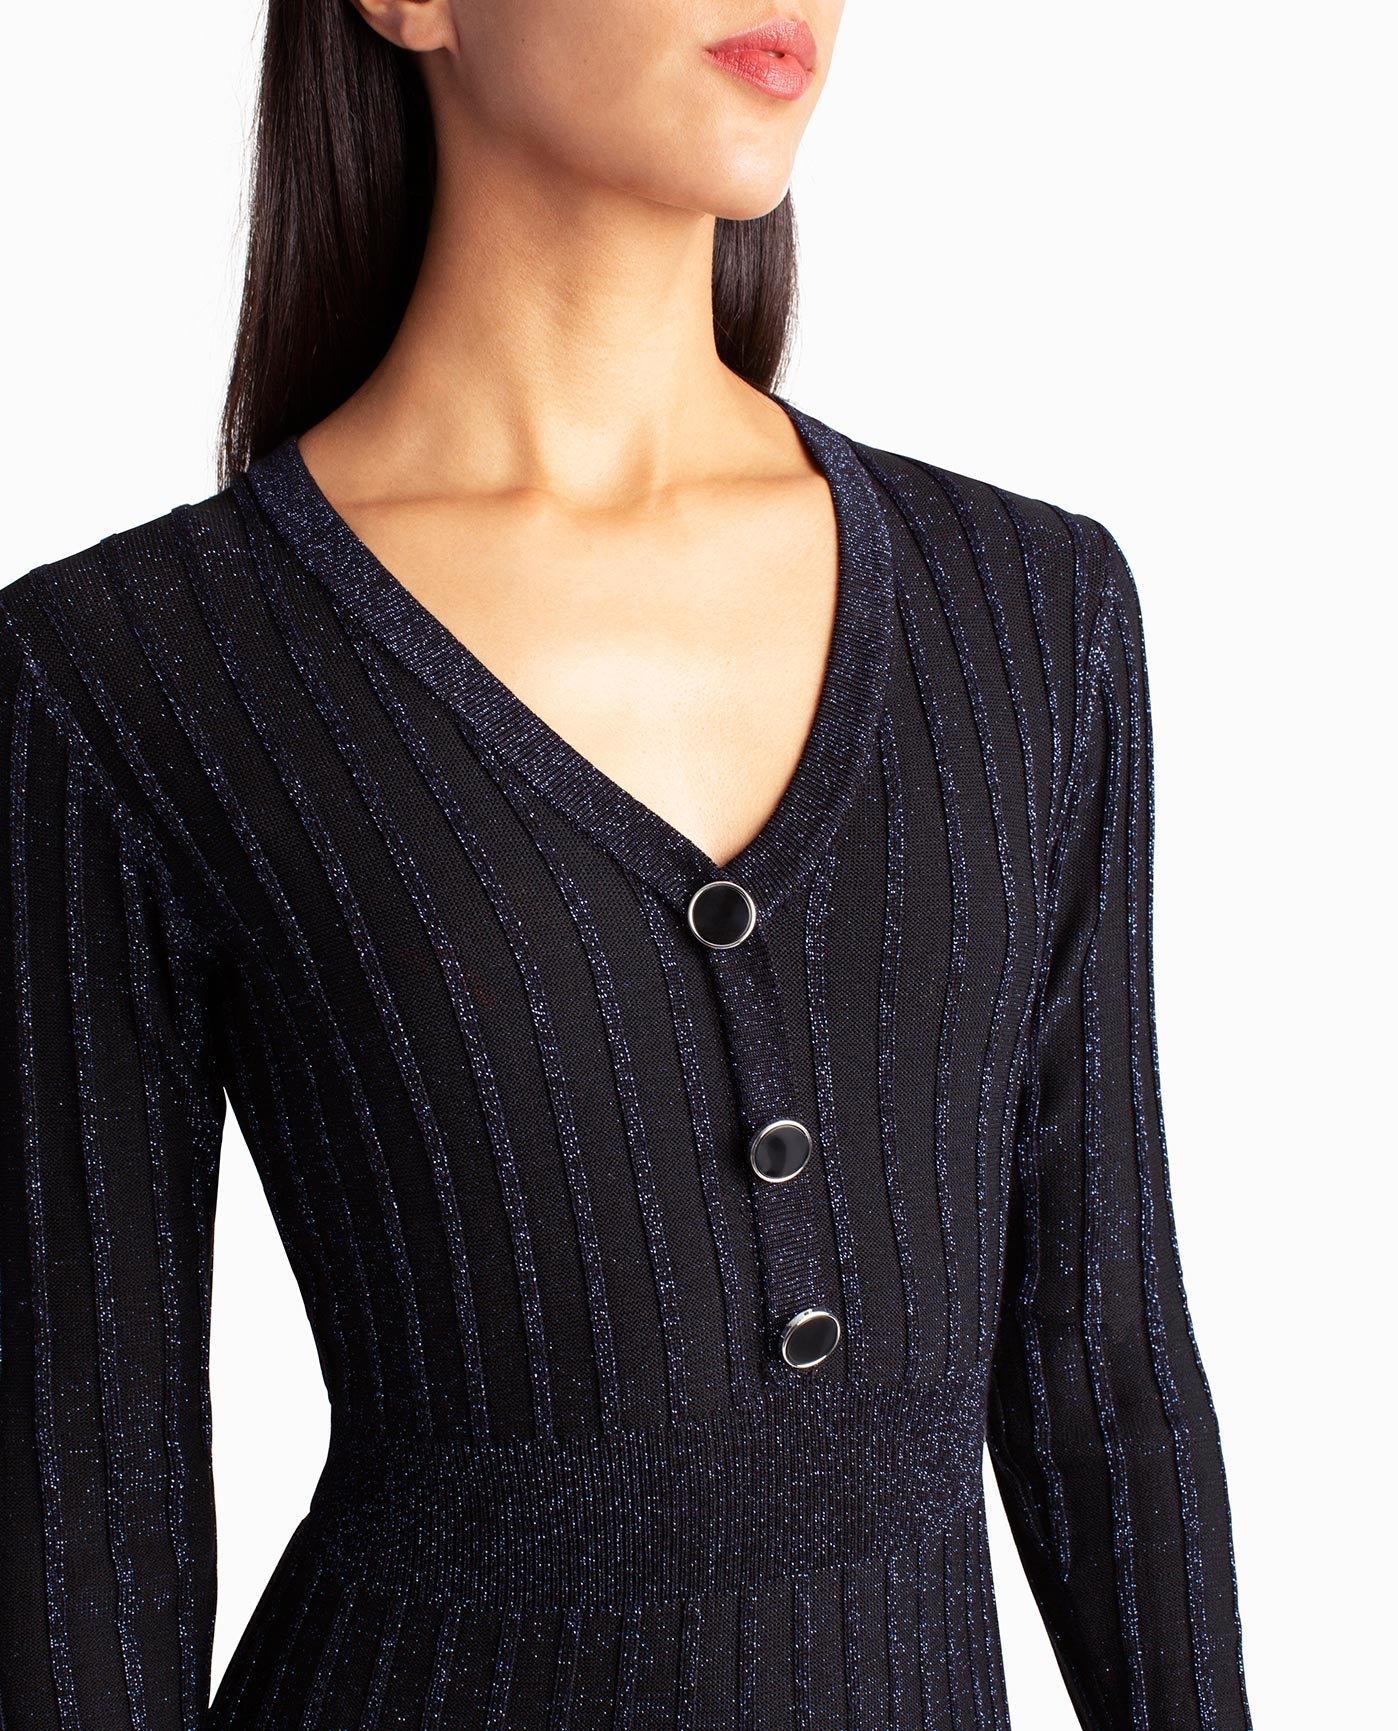 V-NECKLINE WITH LARGE BLUE AND SILVER BUTTONS | Blue Lurex